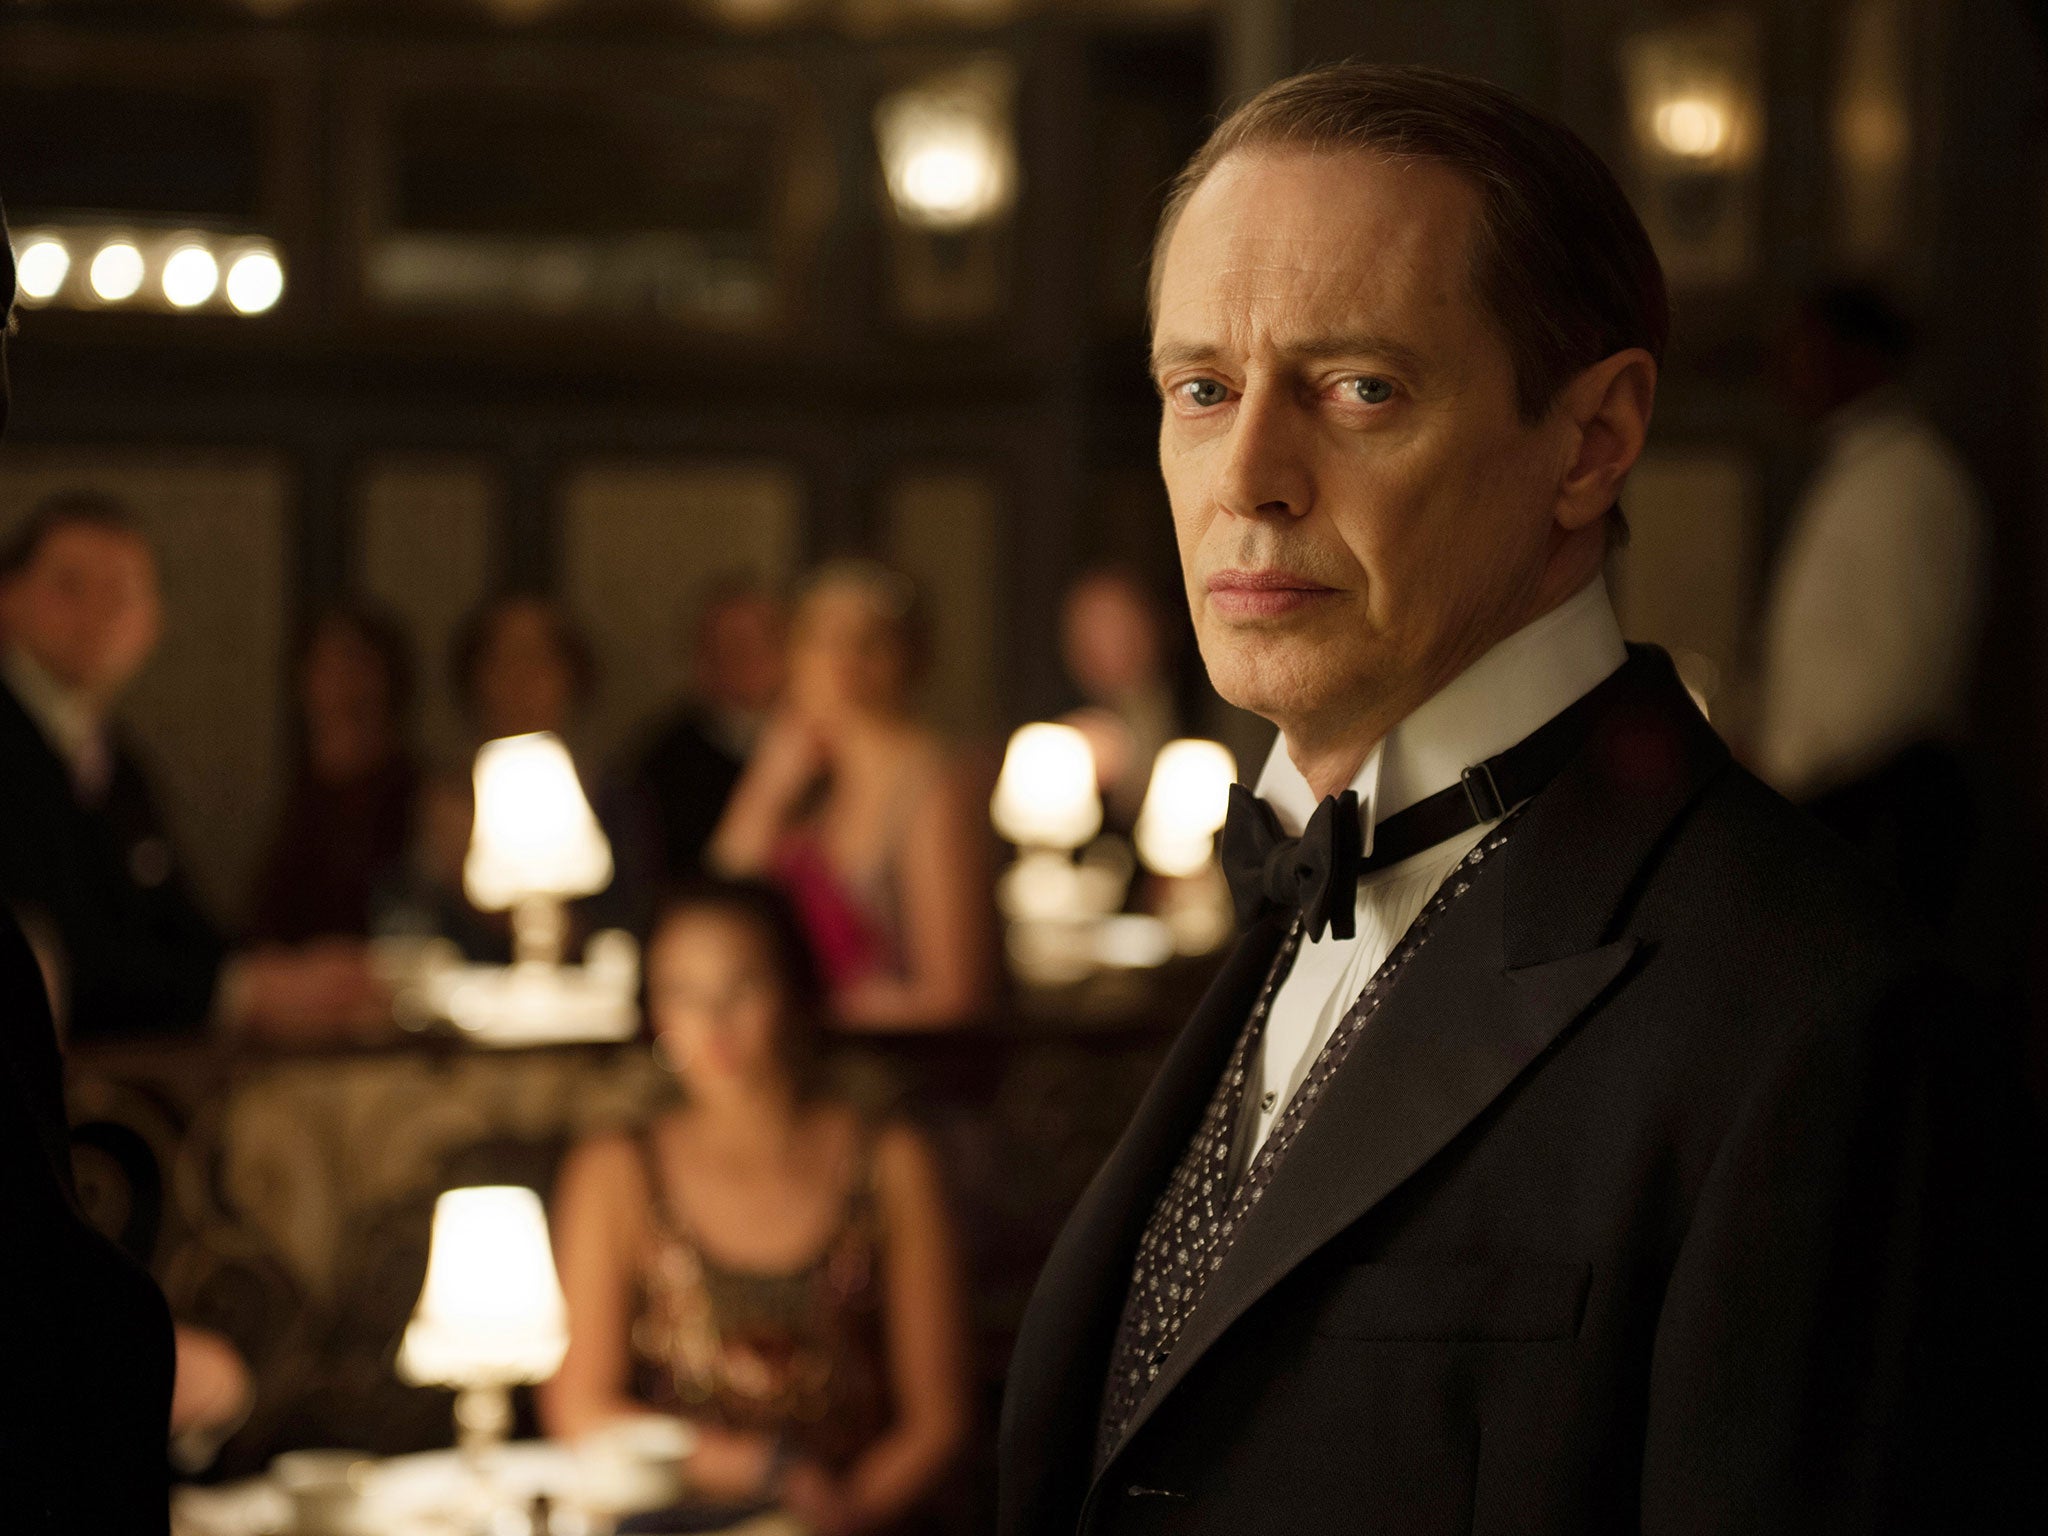 Quiz: Is This Boardwalk Empire Character Dead or Alive?